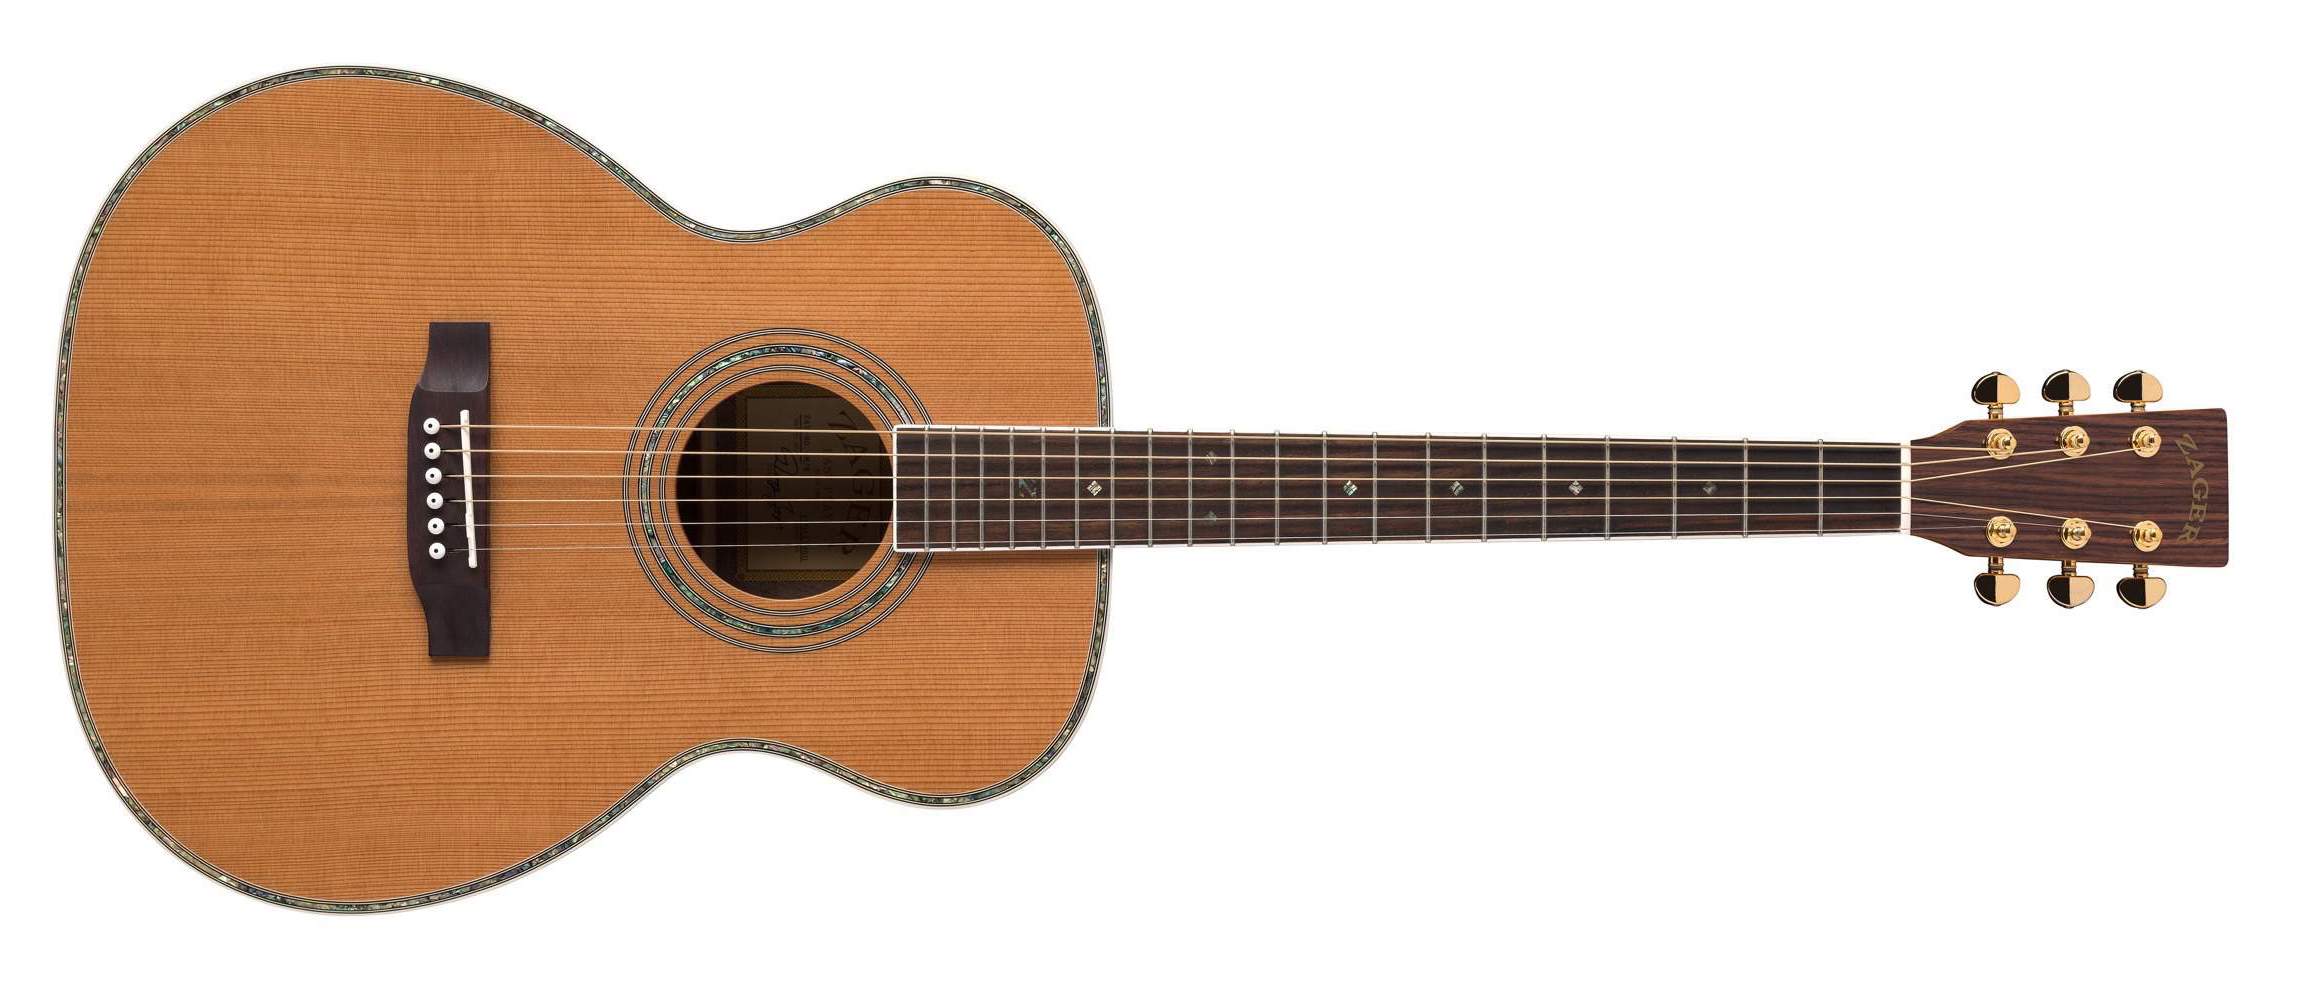 ZAD80 Solid Cedar/Rosewood Acoustic "OM" Size Deal of the Day